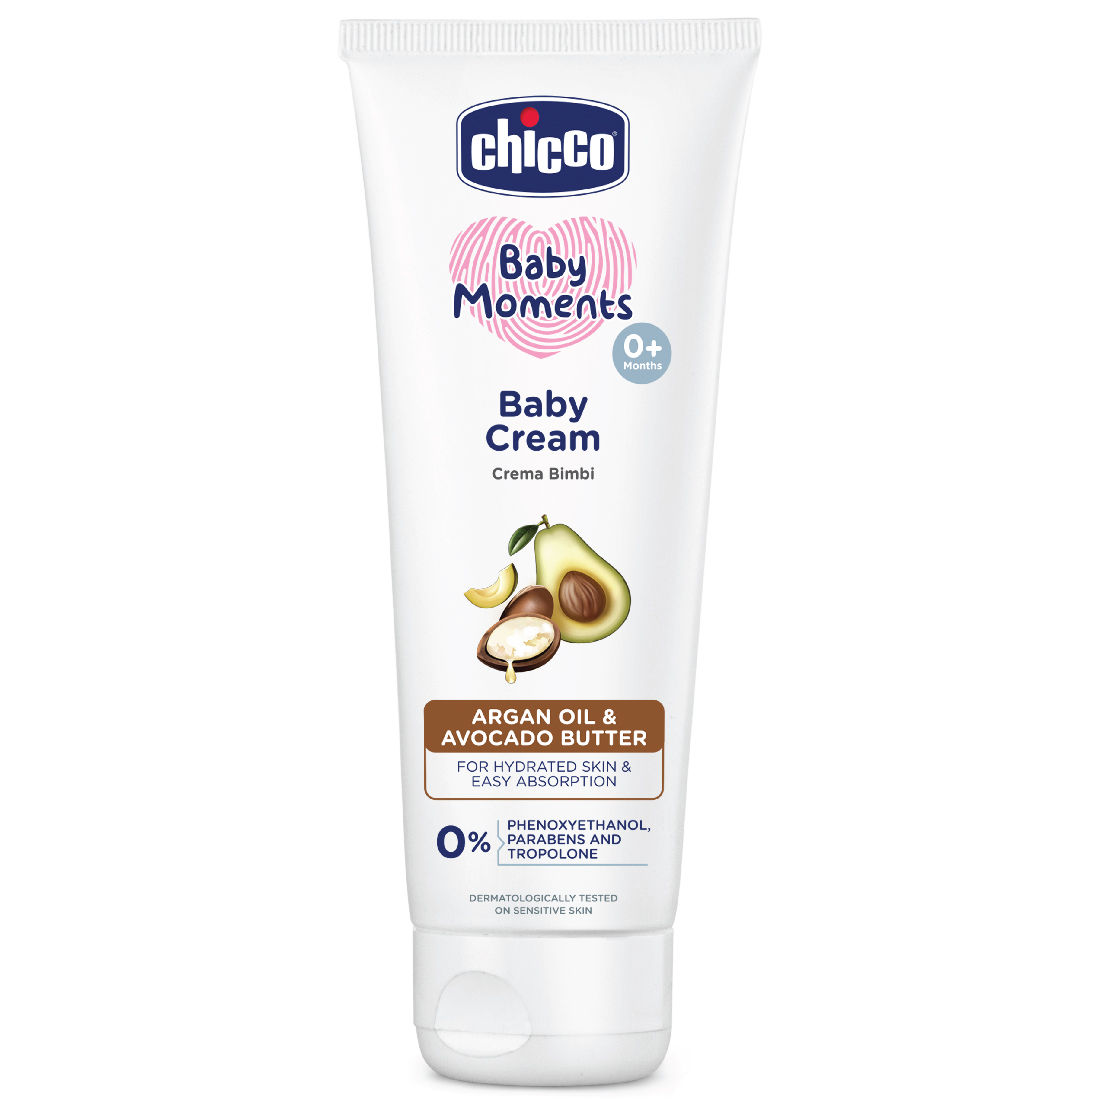 Chicco Baby Moments Baby Cream, 100 gm, Pack of 1 